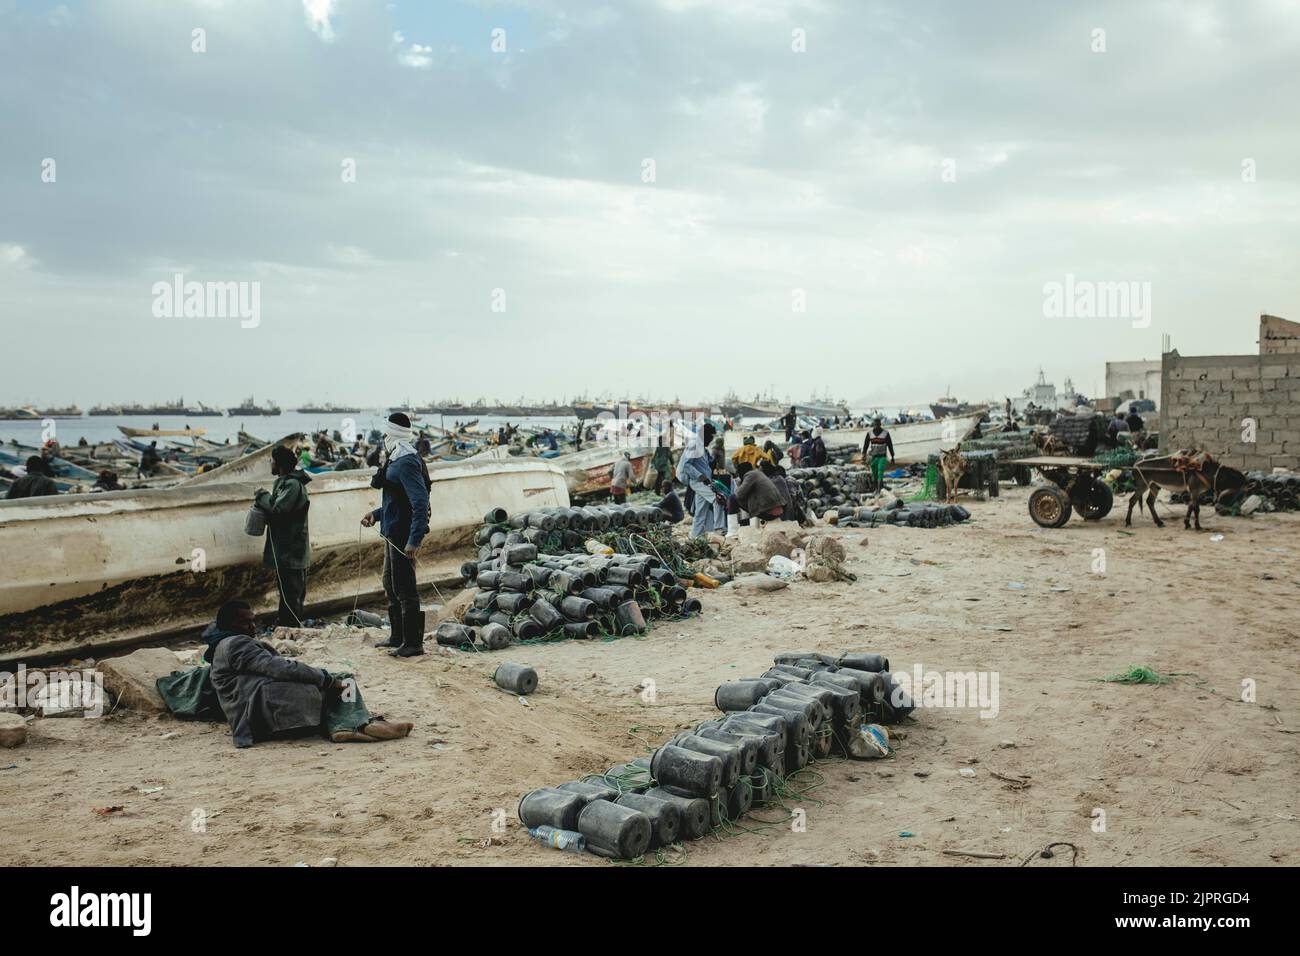 Port de Peche Traditional, prepared plastic canisters for catching octopus, Nouadhibou, Mauritania Stock Photo